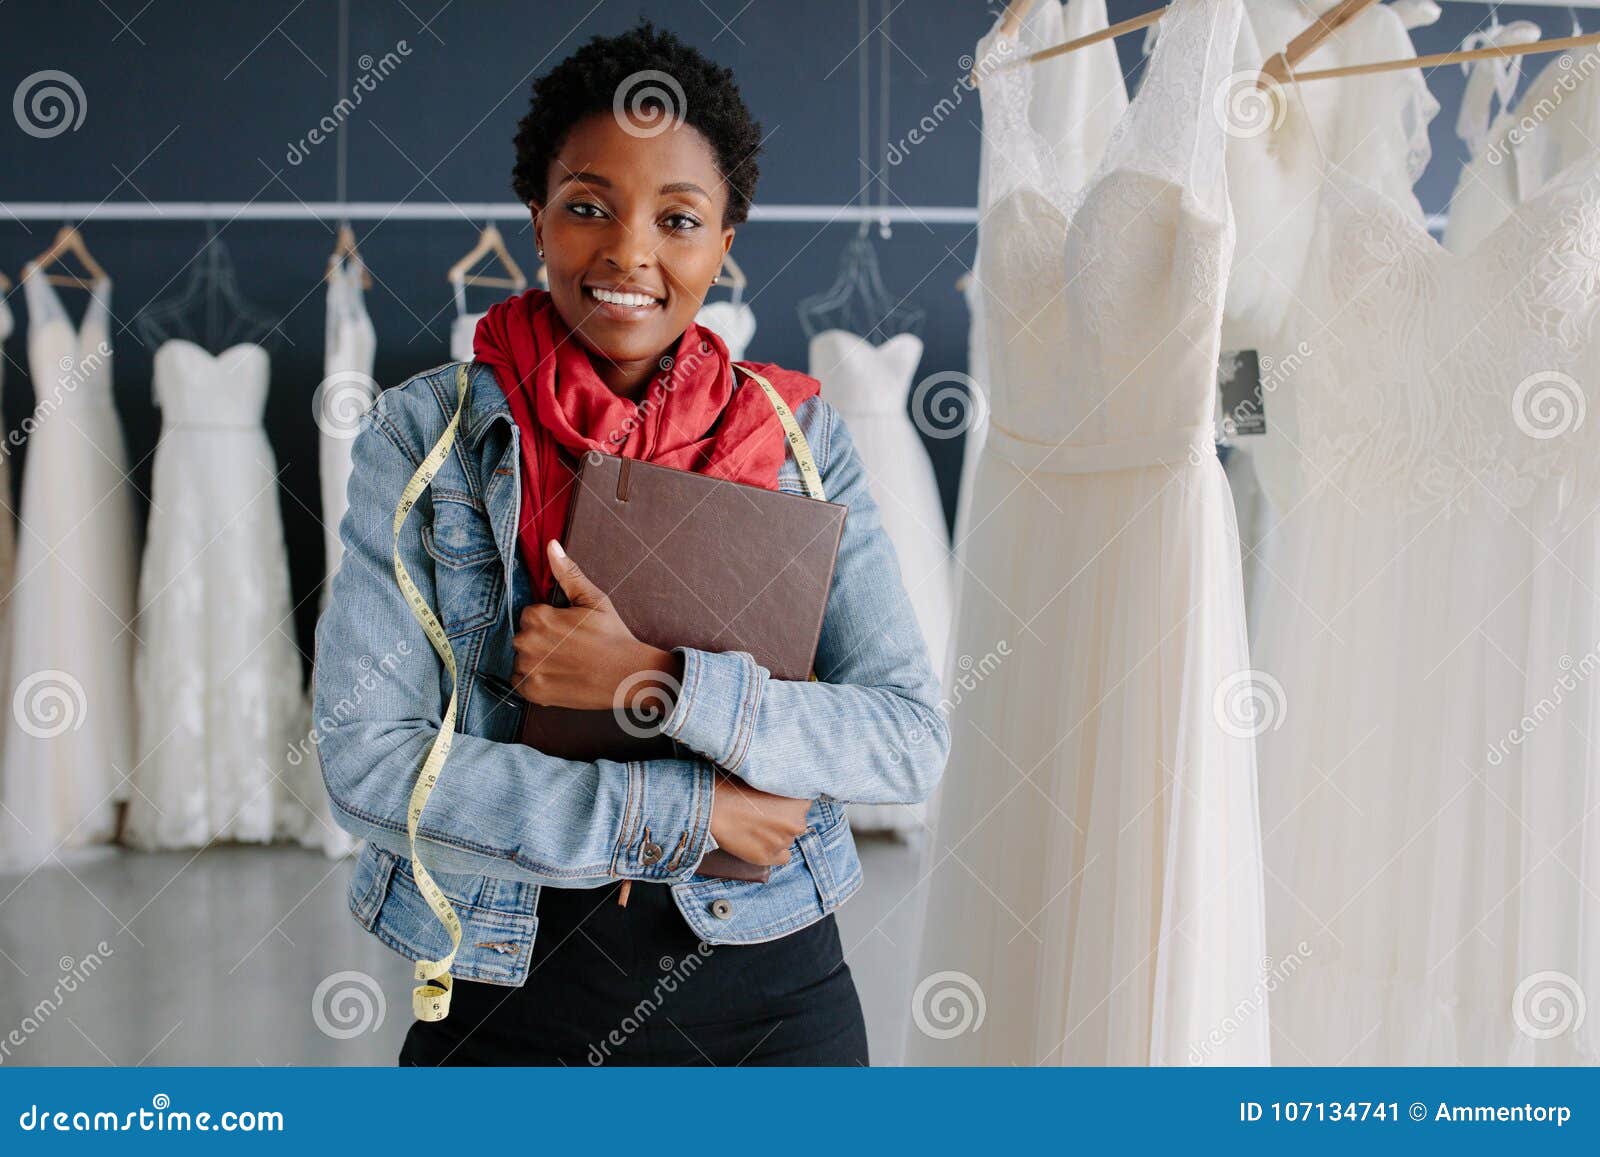  Wedding  Dress  Store  Owner  With A Diary Stock Image Image 